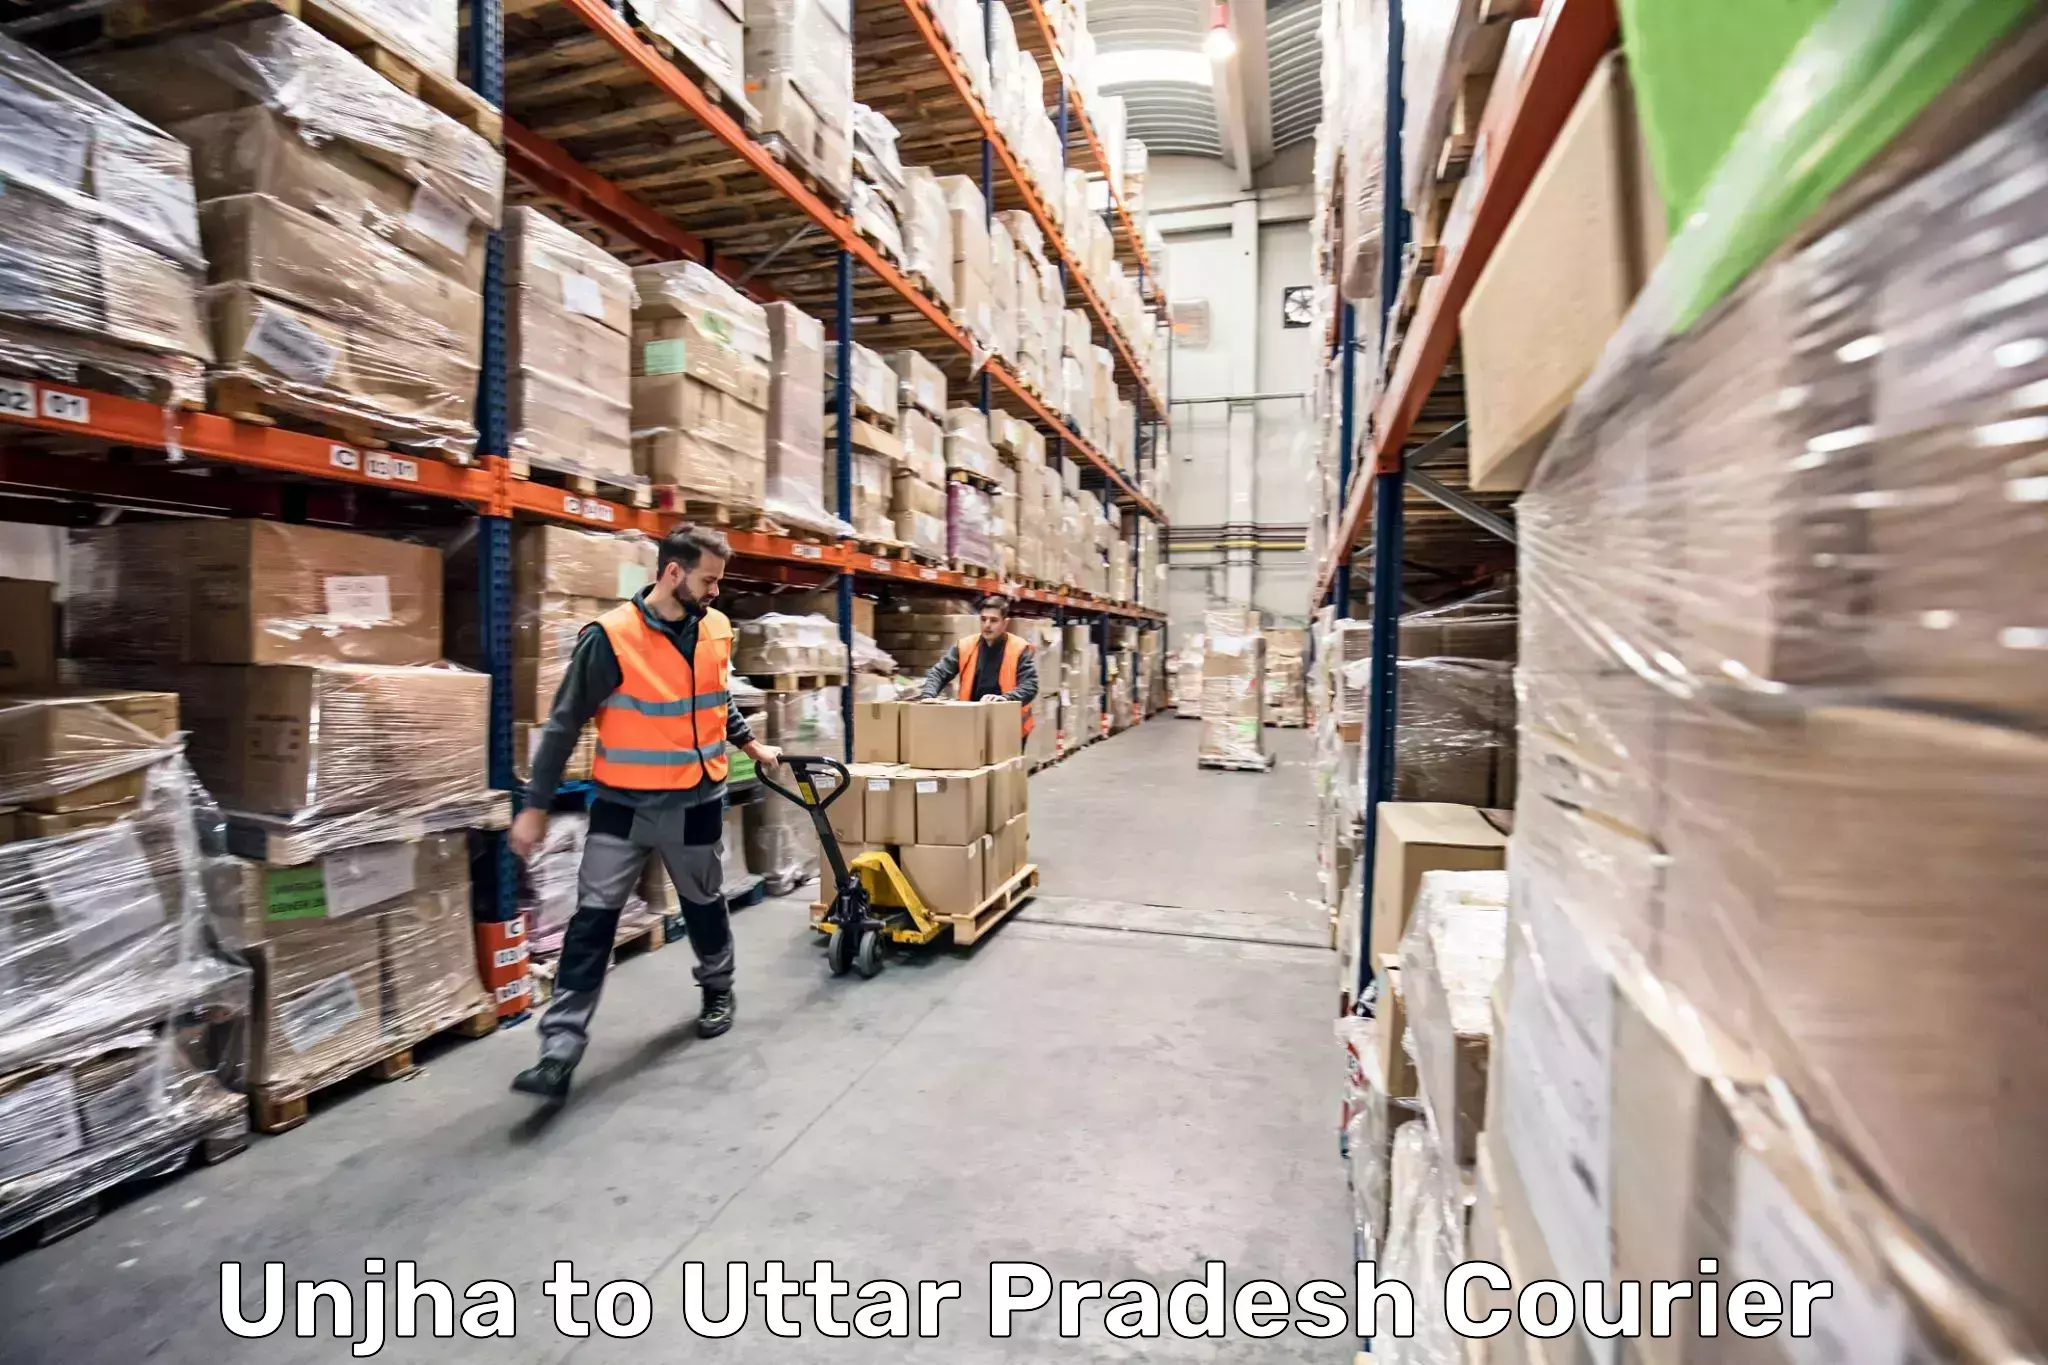 Instant baggage transport quote in Unjha to Soraon